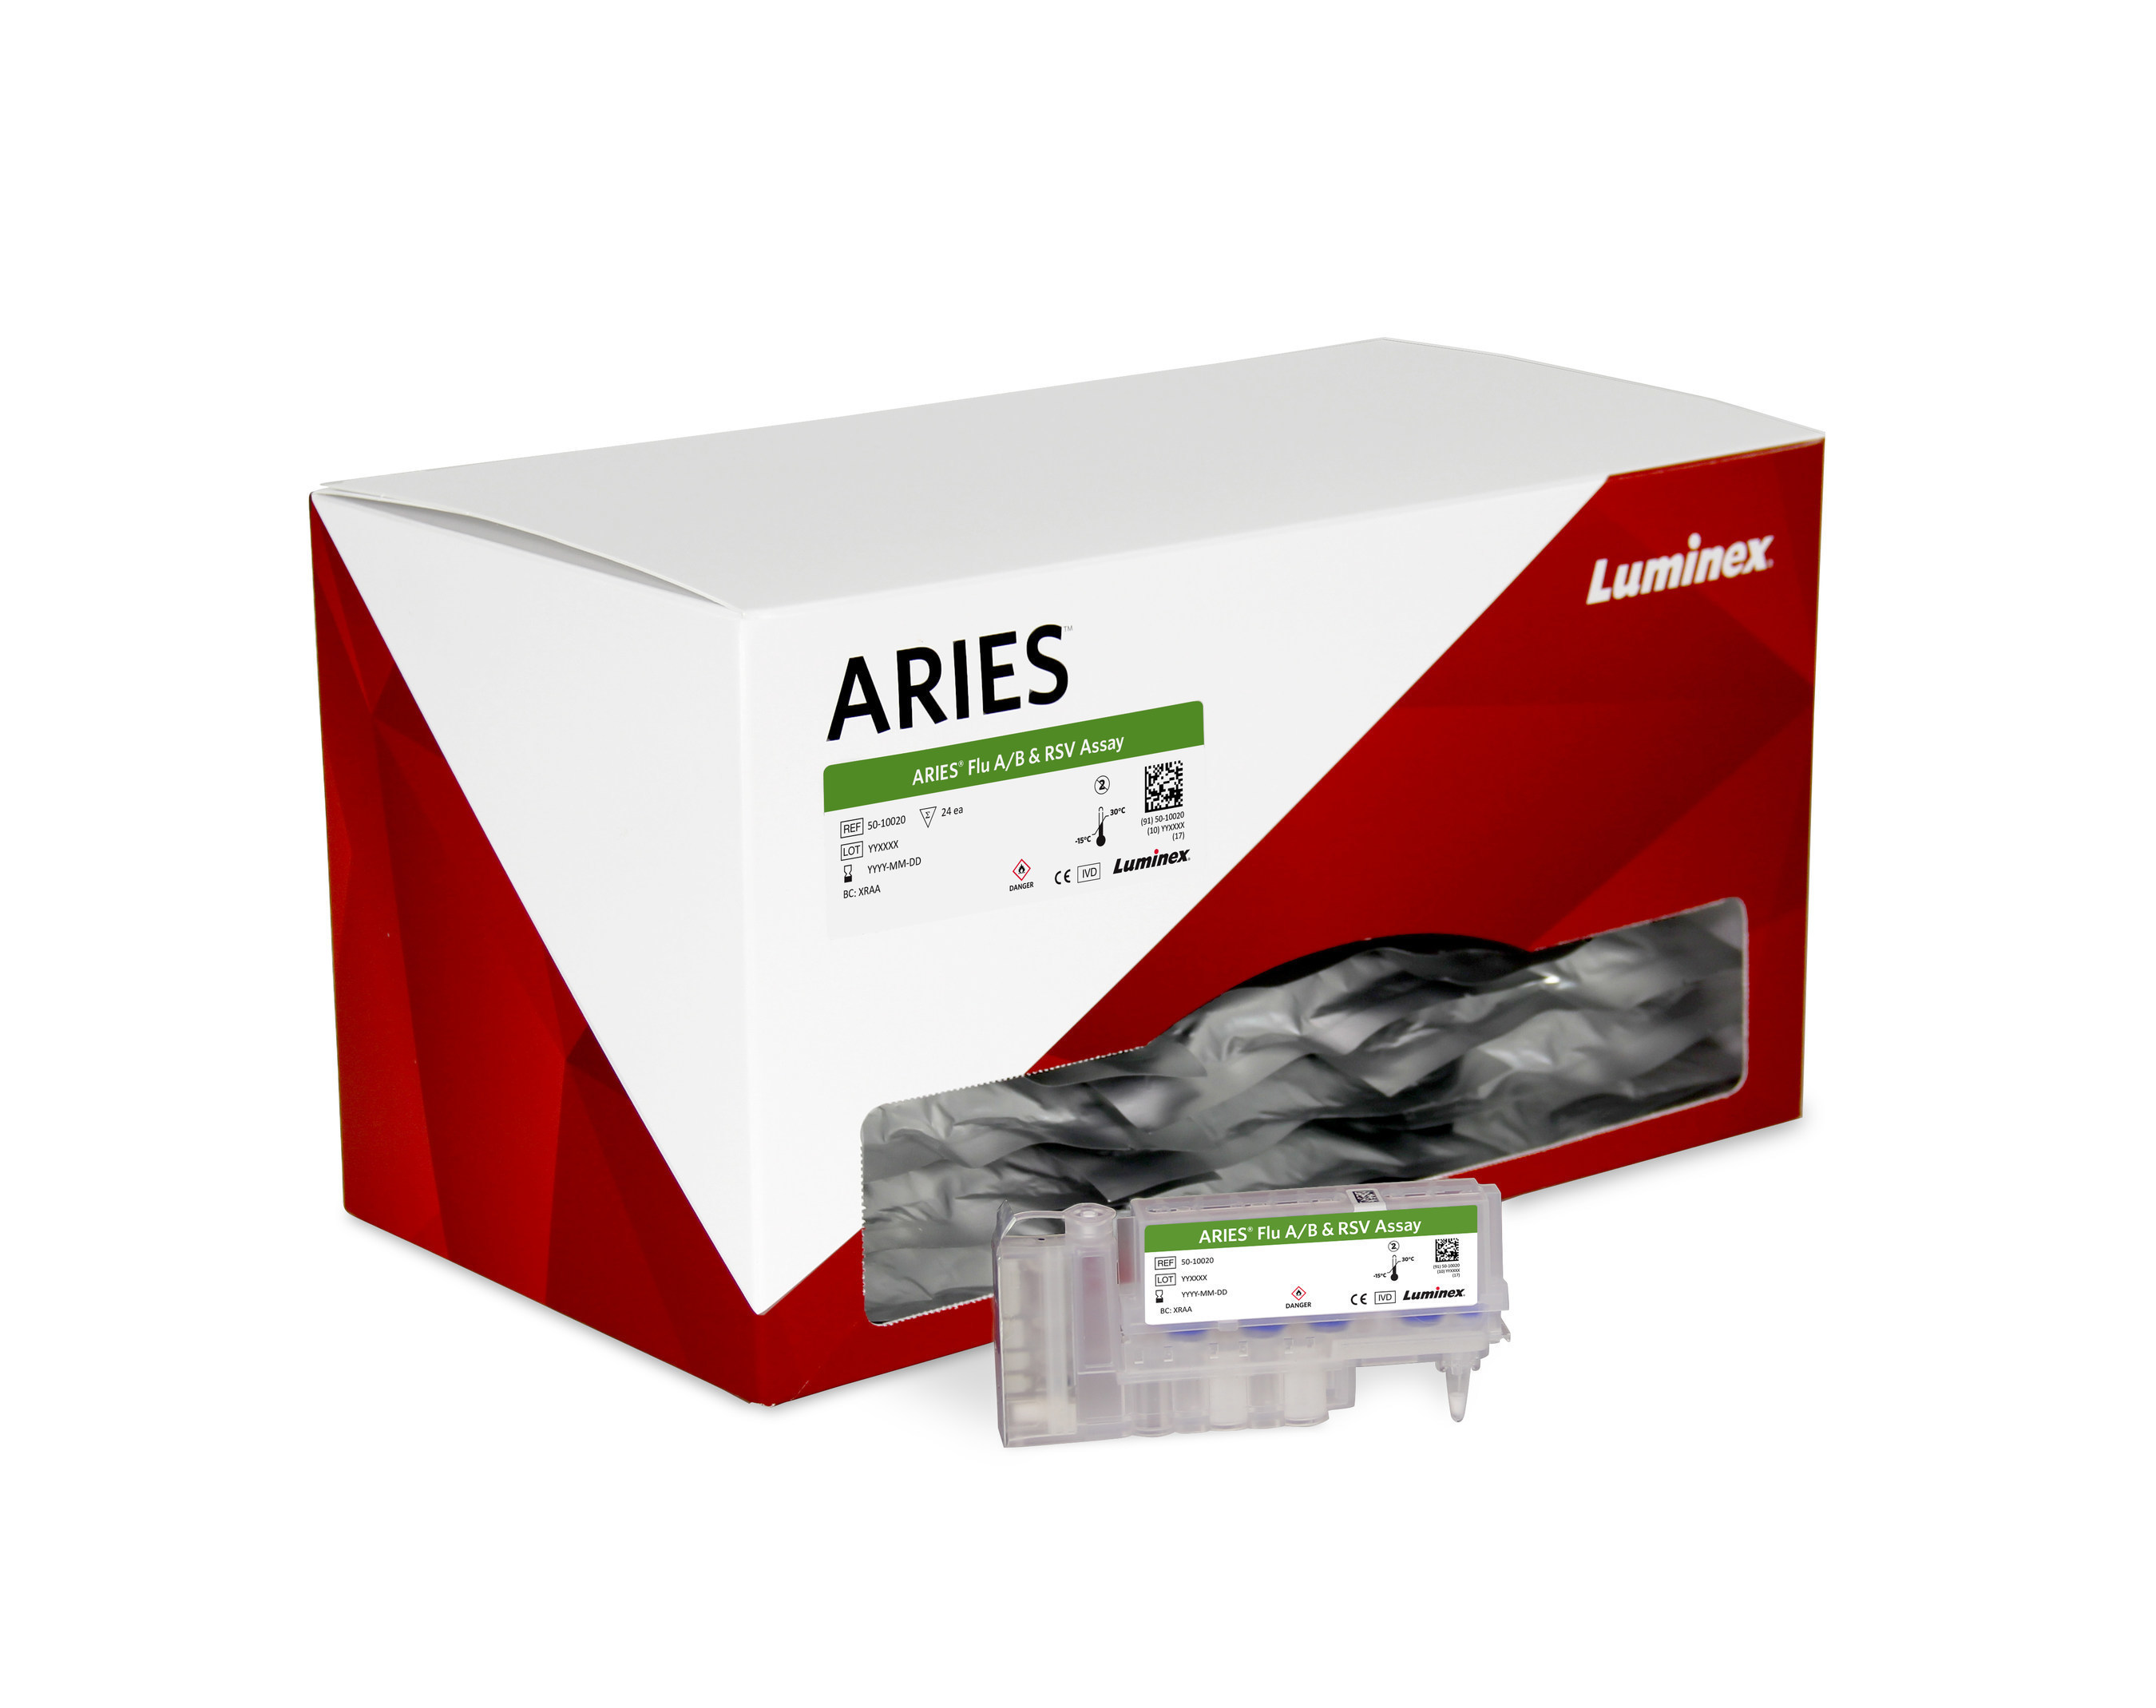 The ARIES(R) Flu A/B & RSV Assay is a rapid, accurate method for the detection and differentiation of influenza A virus, influenza B virus, and respiratory syncytial virus (RSV) from nasopharyngeal swab (NPS) specimens using the ARIES(R) System.